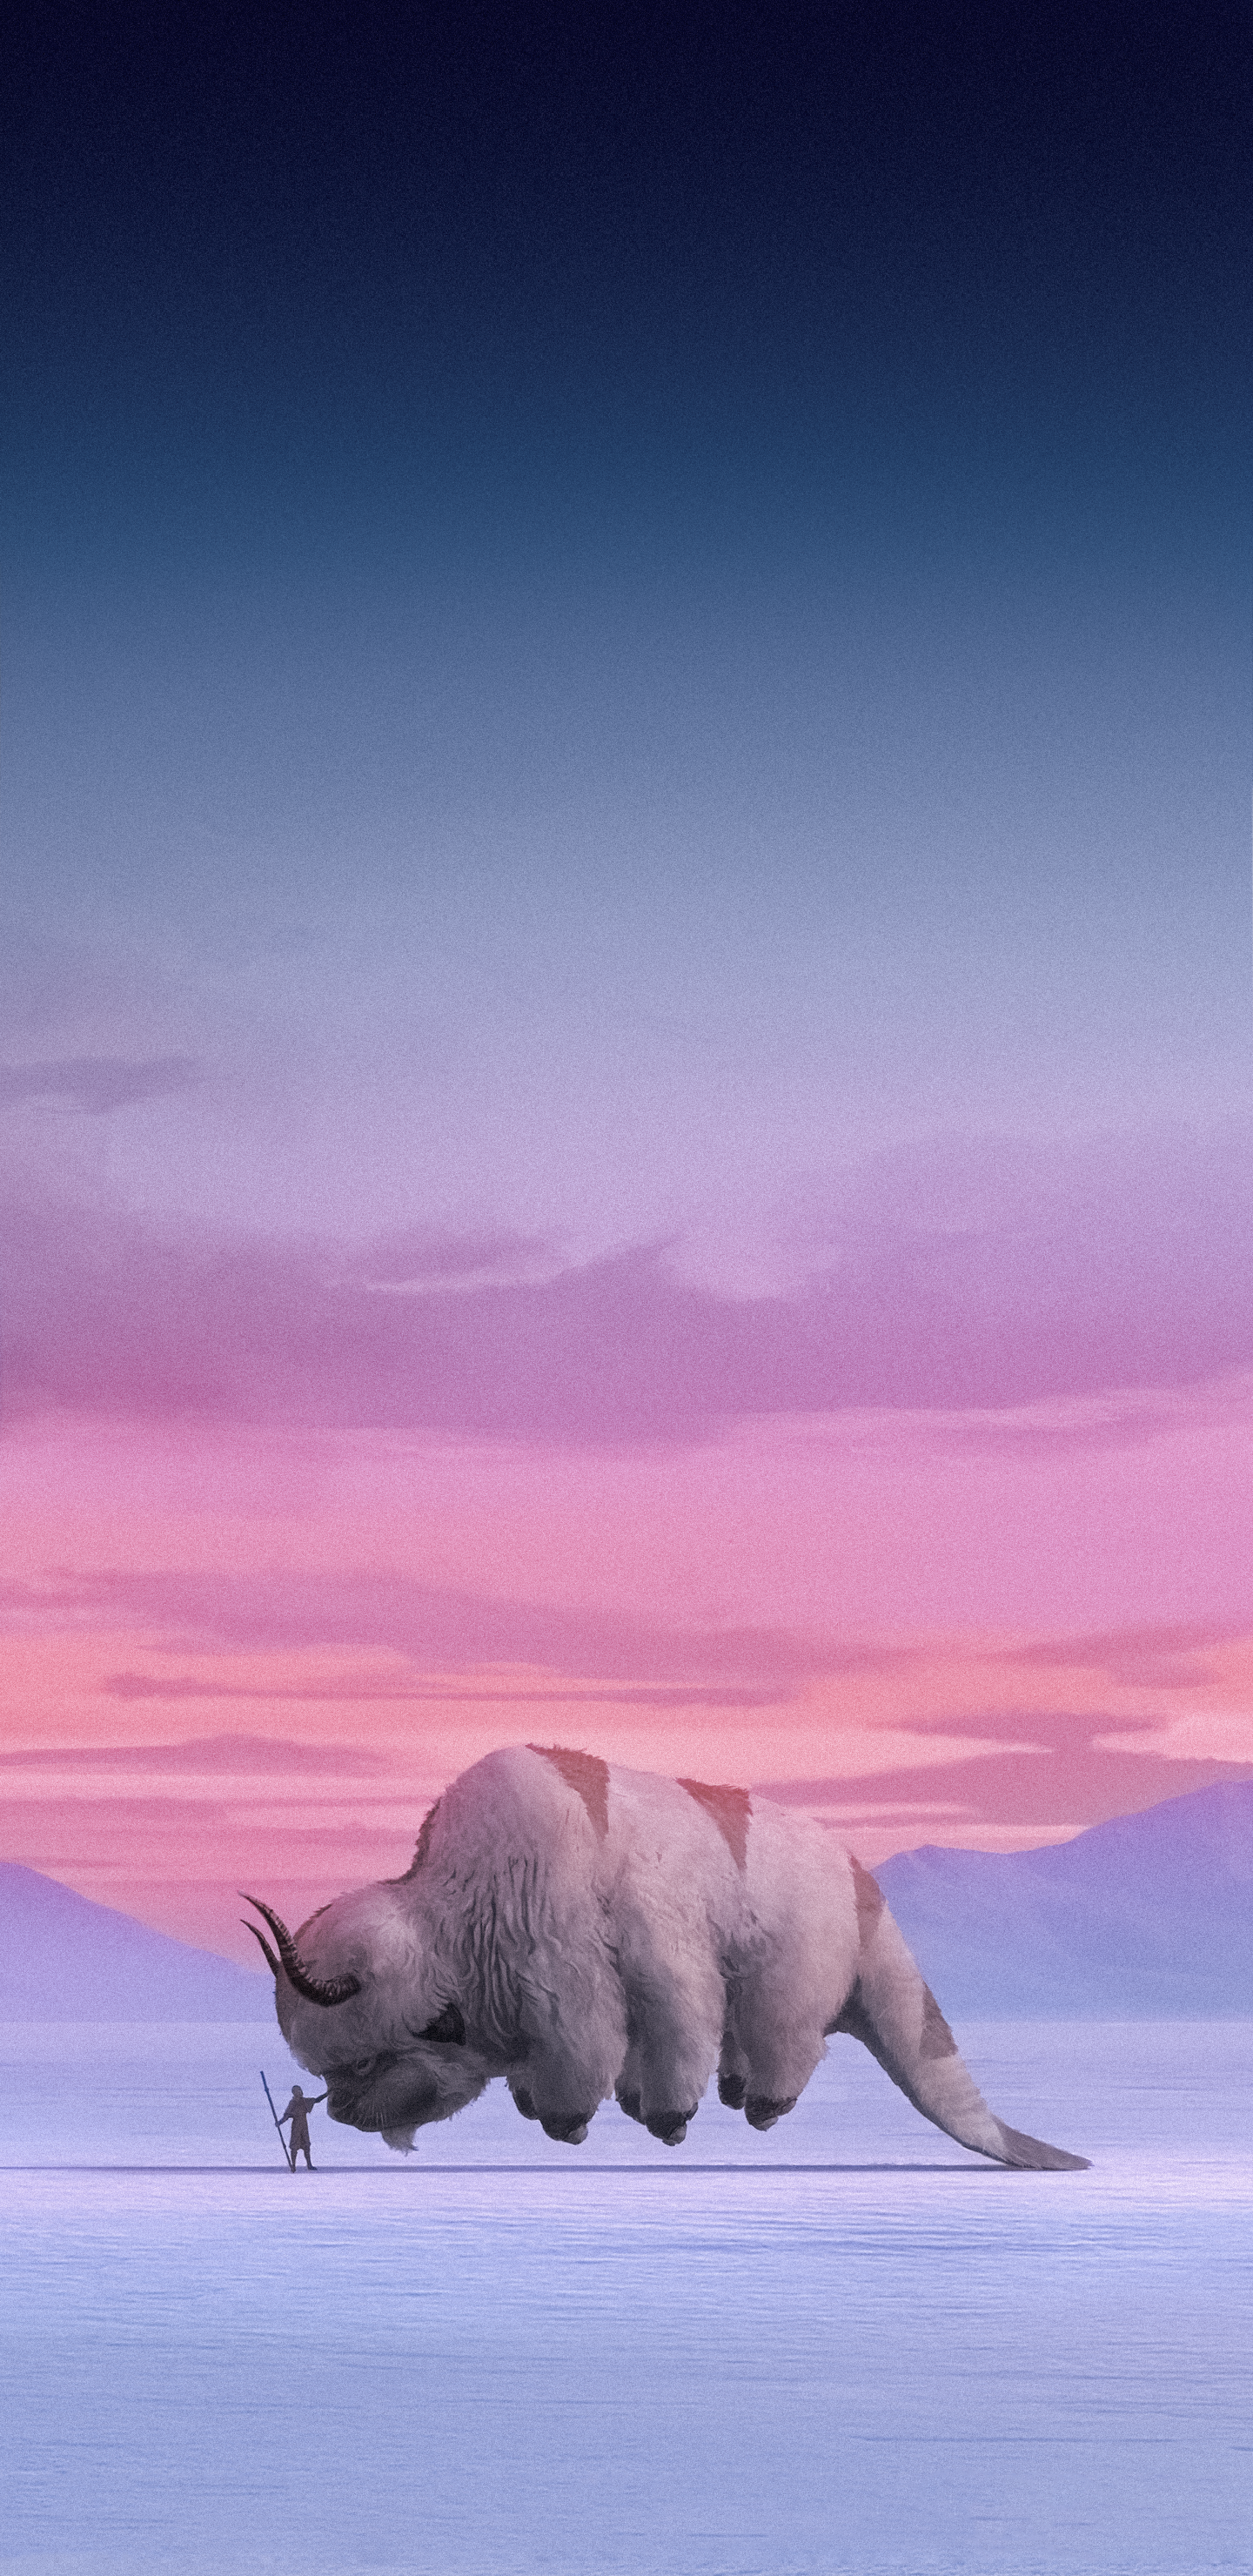 i edited this wallpaper with appa and aang in photoshop and